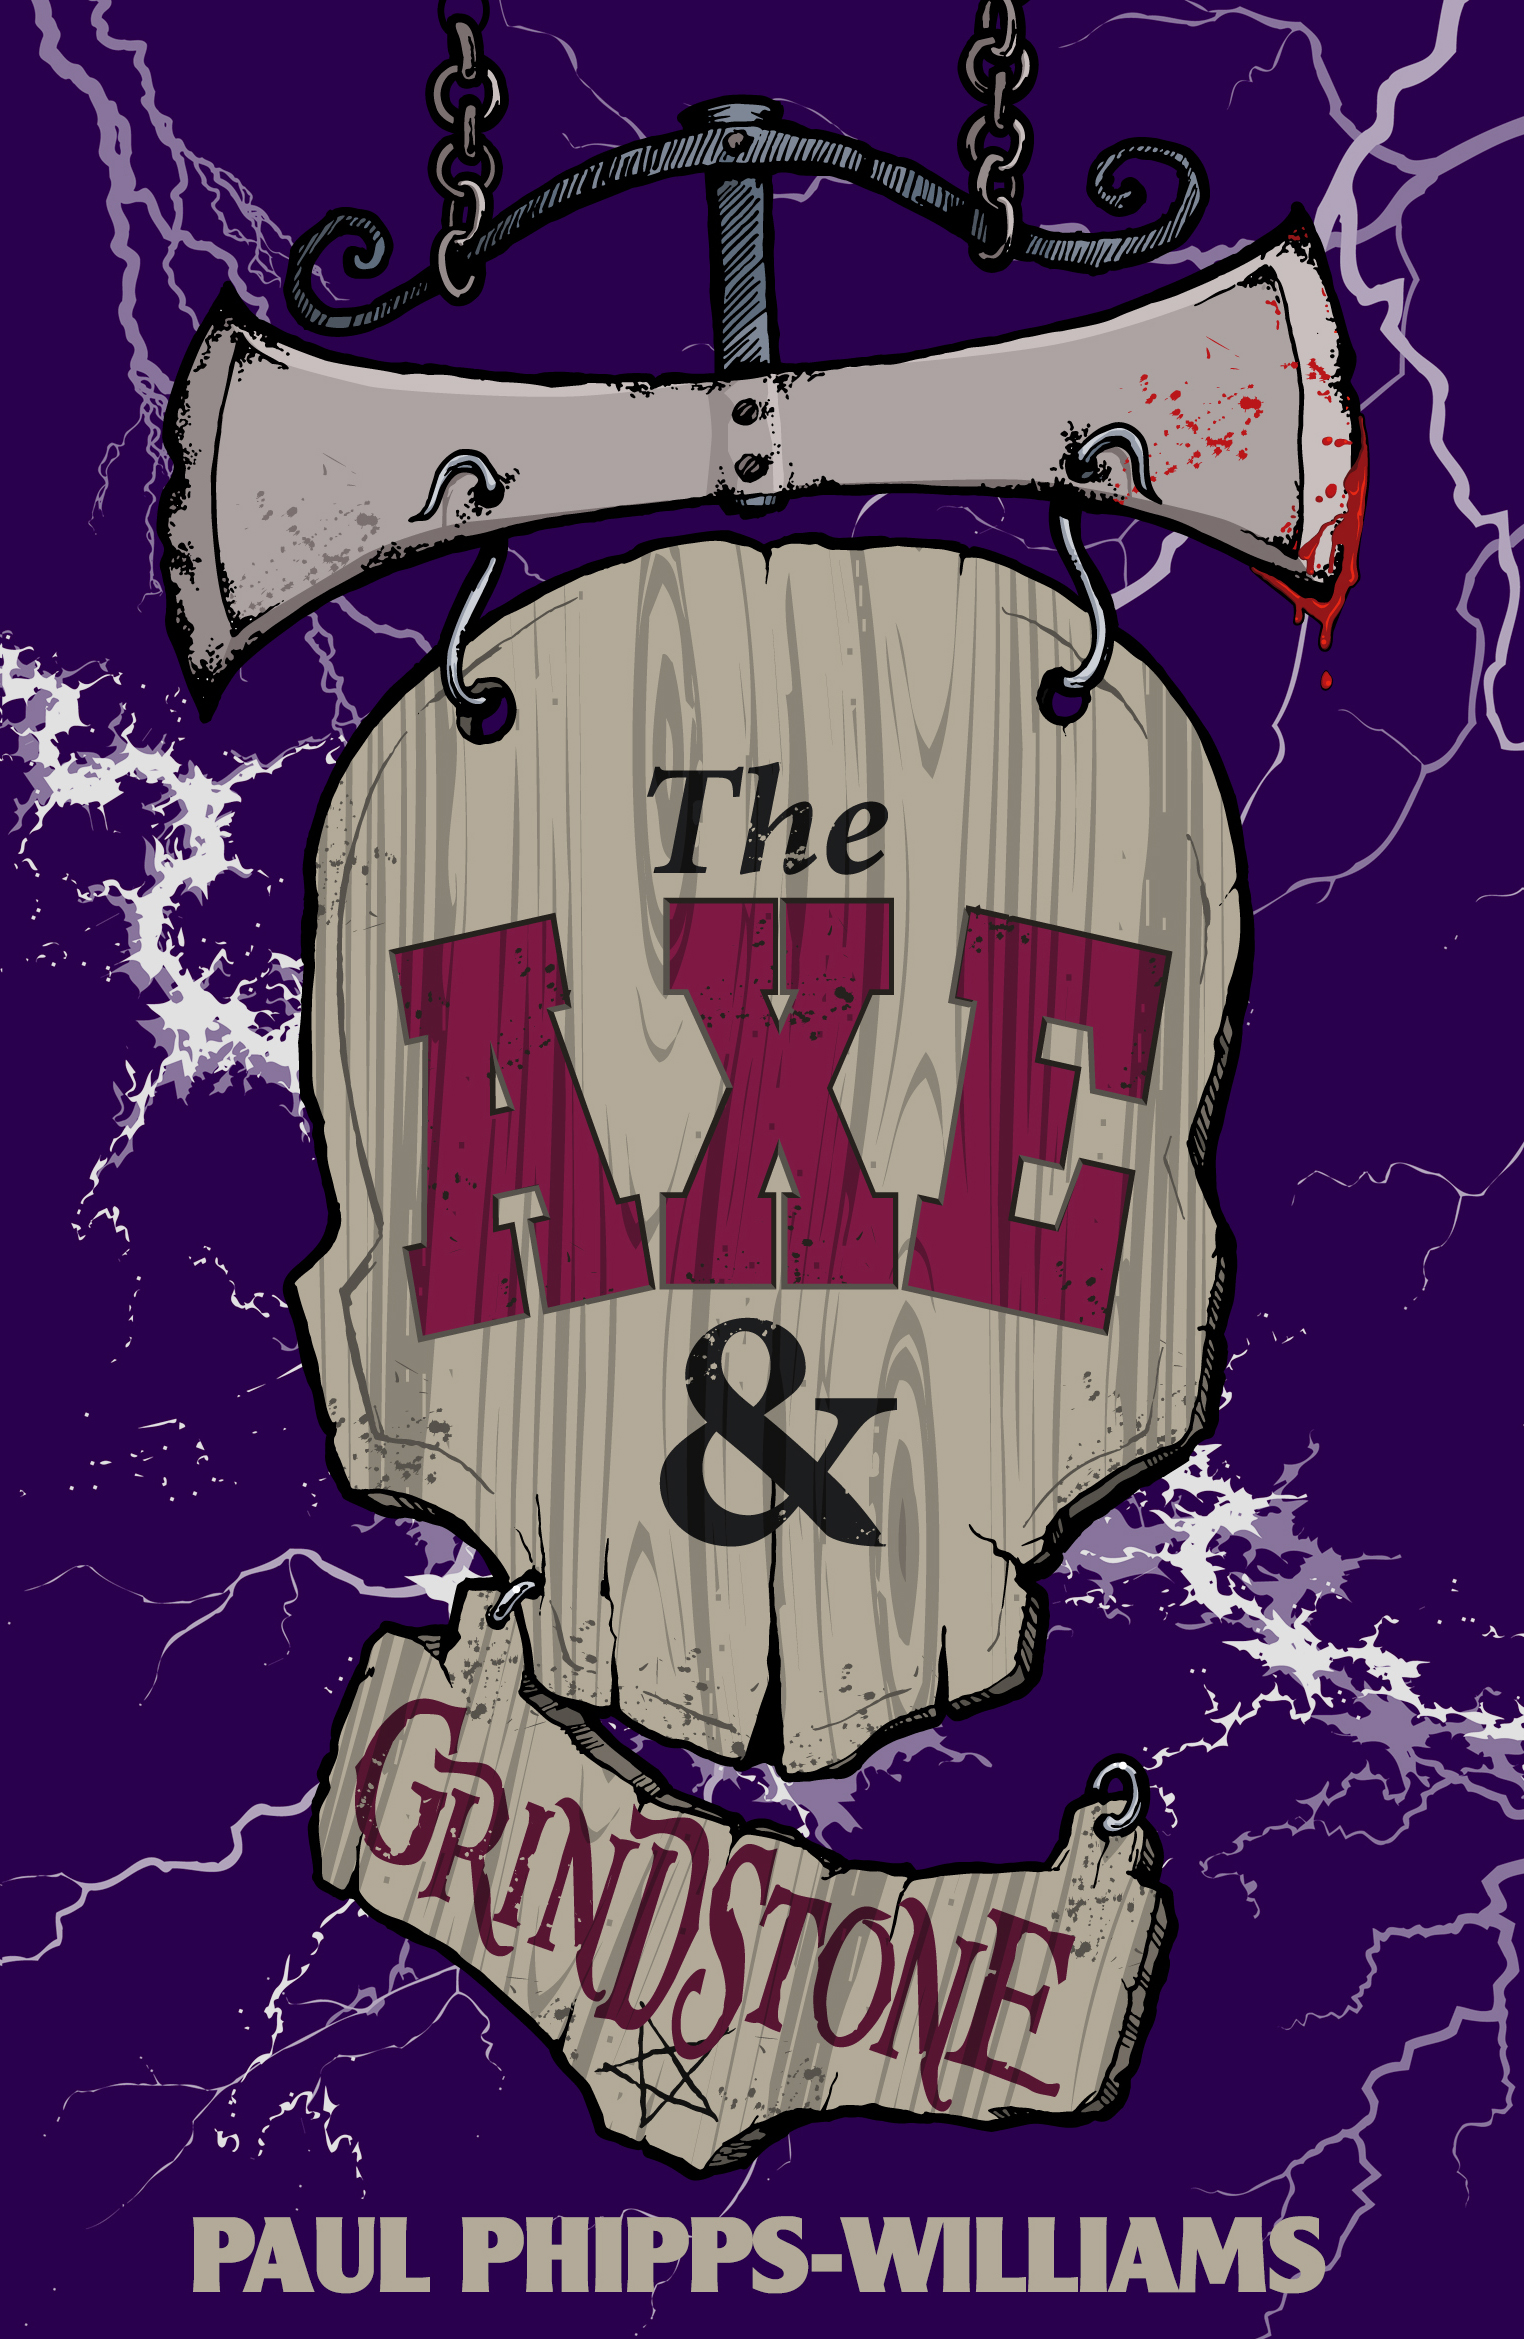 FREE: The Axe And Grindstone by Paul Phipps-Williams